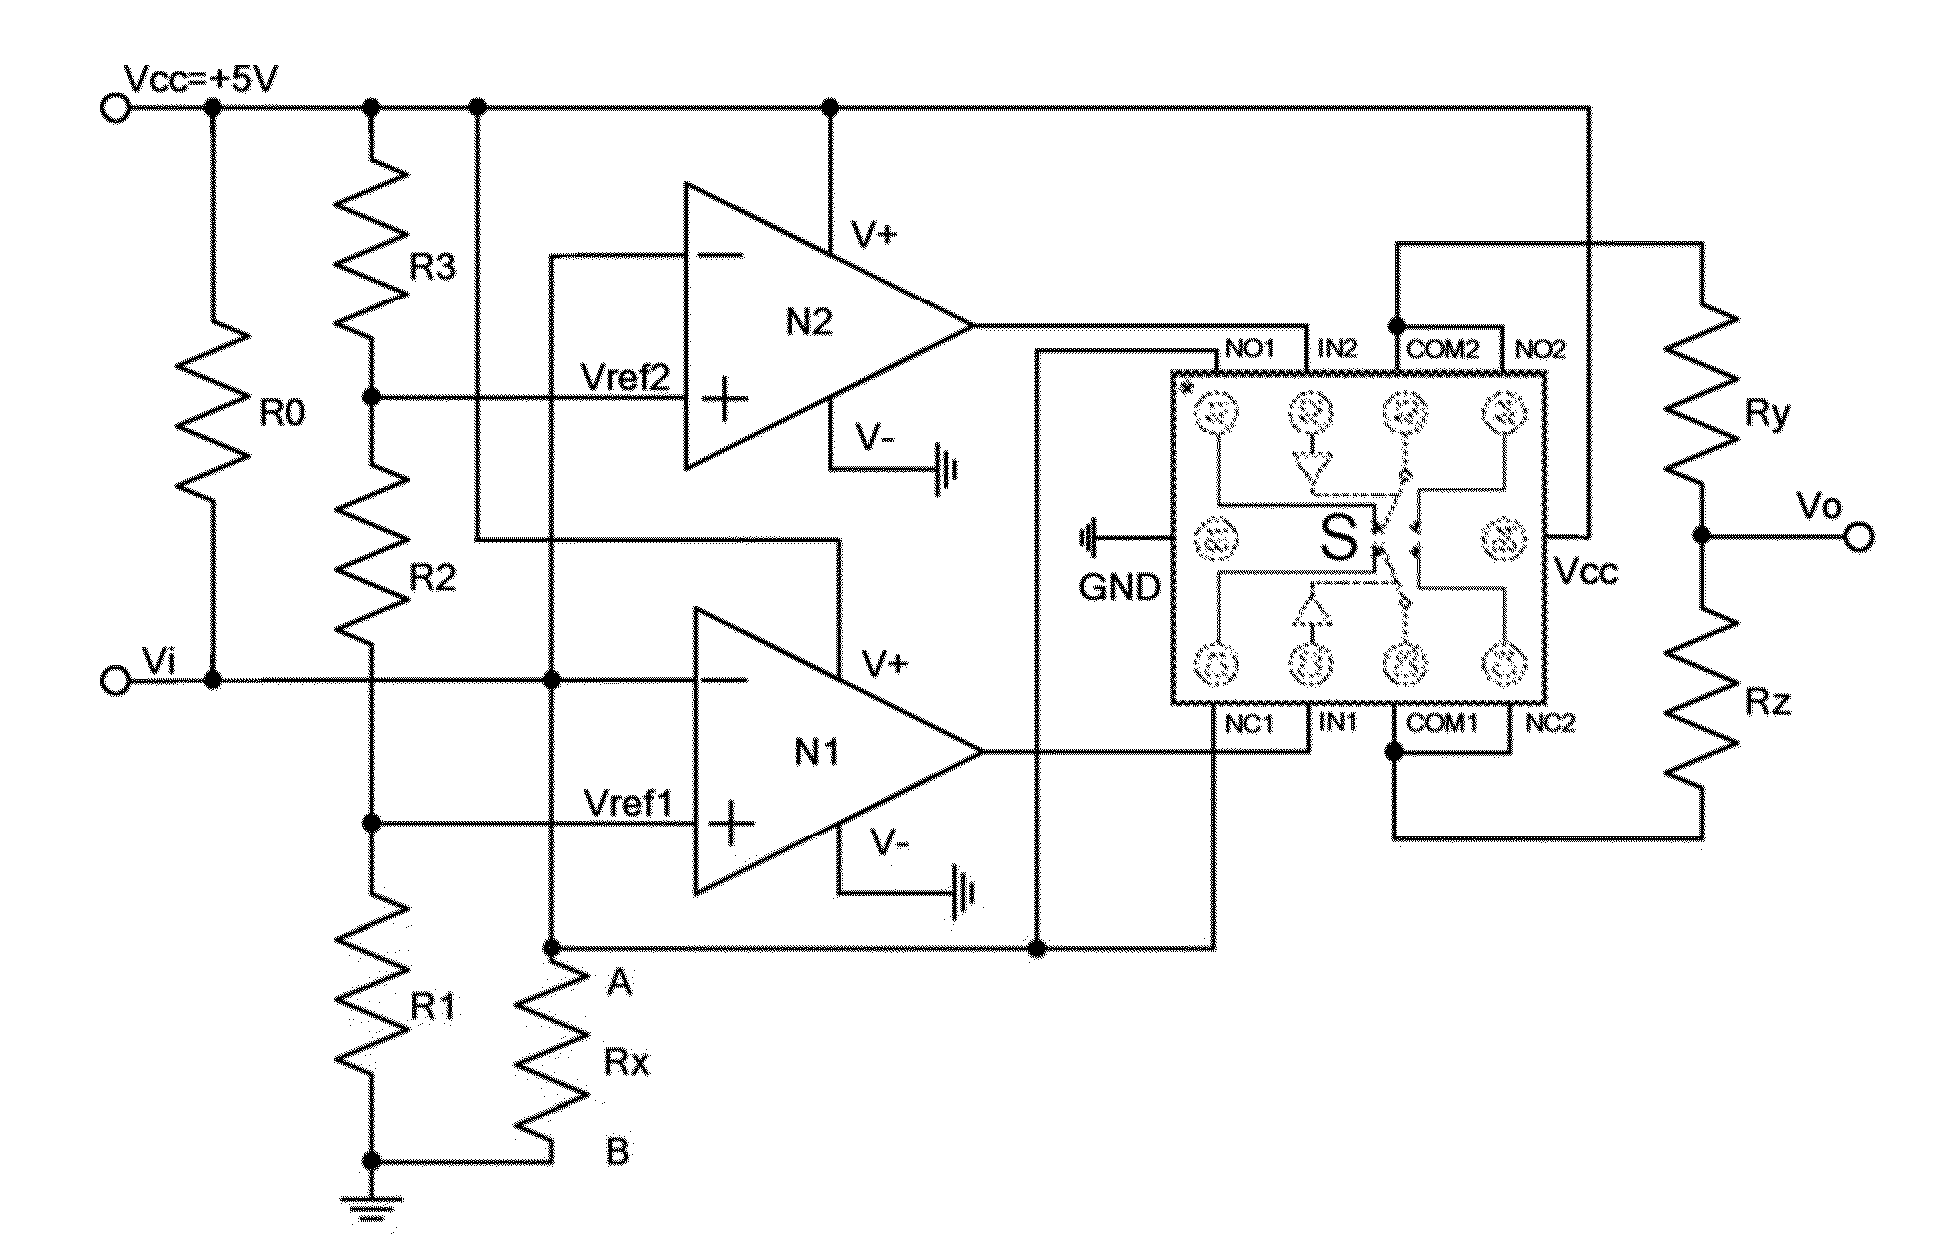 Method and Circuitry for Matching Impedance